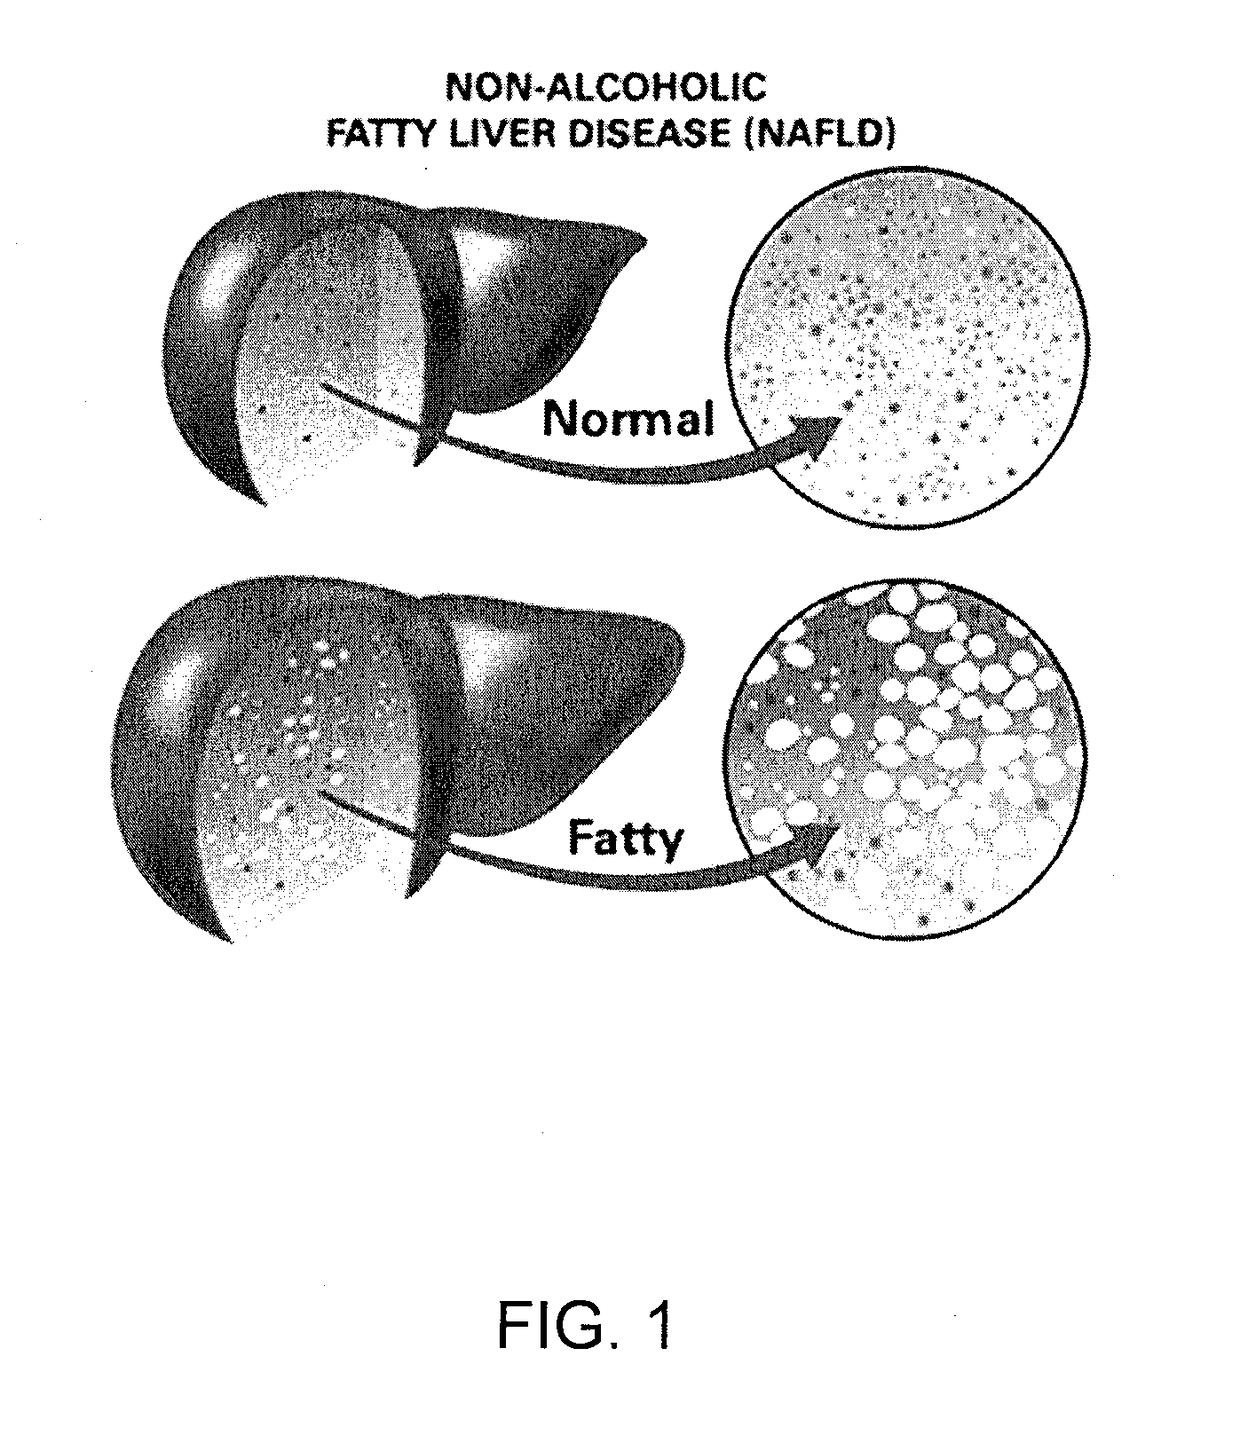 Method and System for Treating Non-Alcoholic Fatty Liver Disease